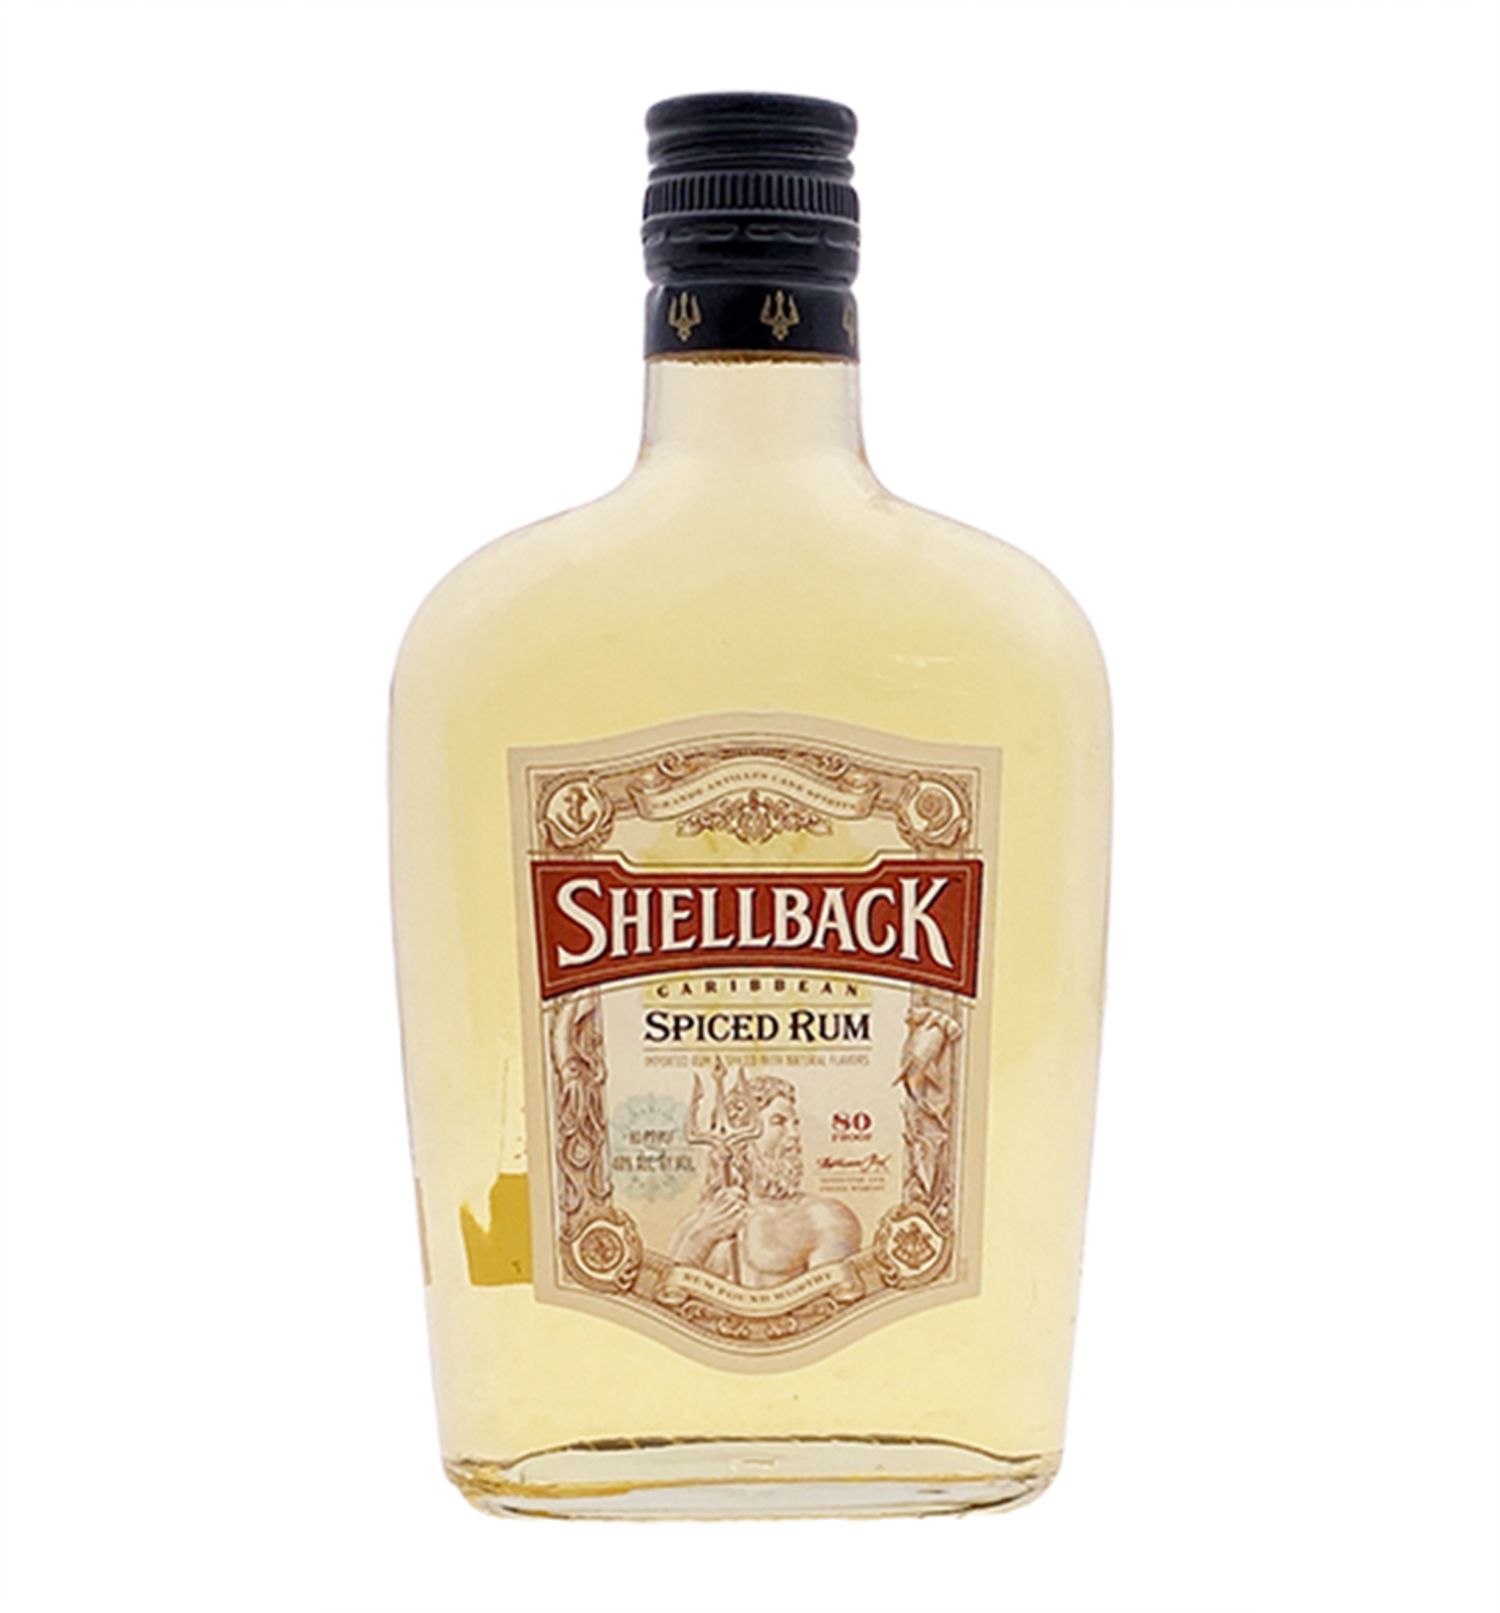 Shellback, Caribbean Spiced Rum 375ml $12 Uncle FREE - Wine&Spirits Fossil DELIVERY